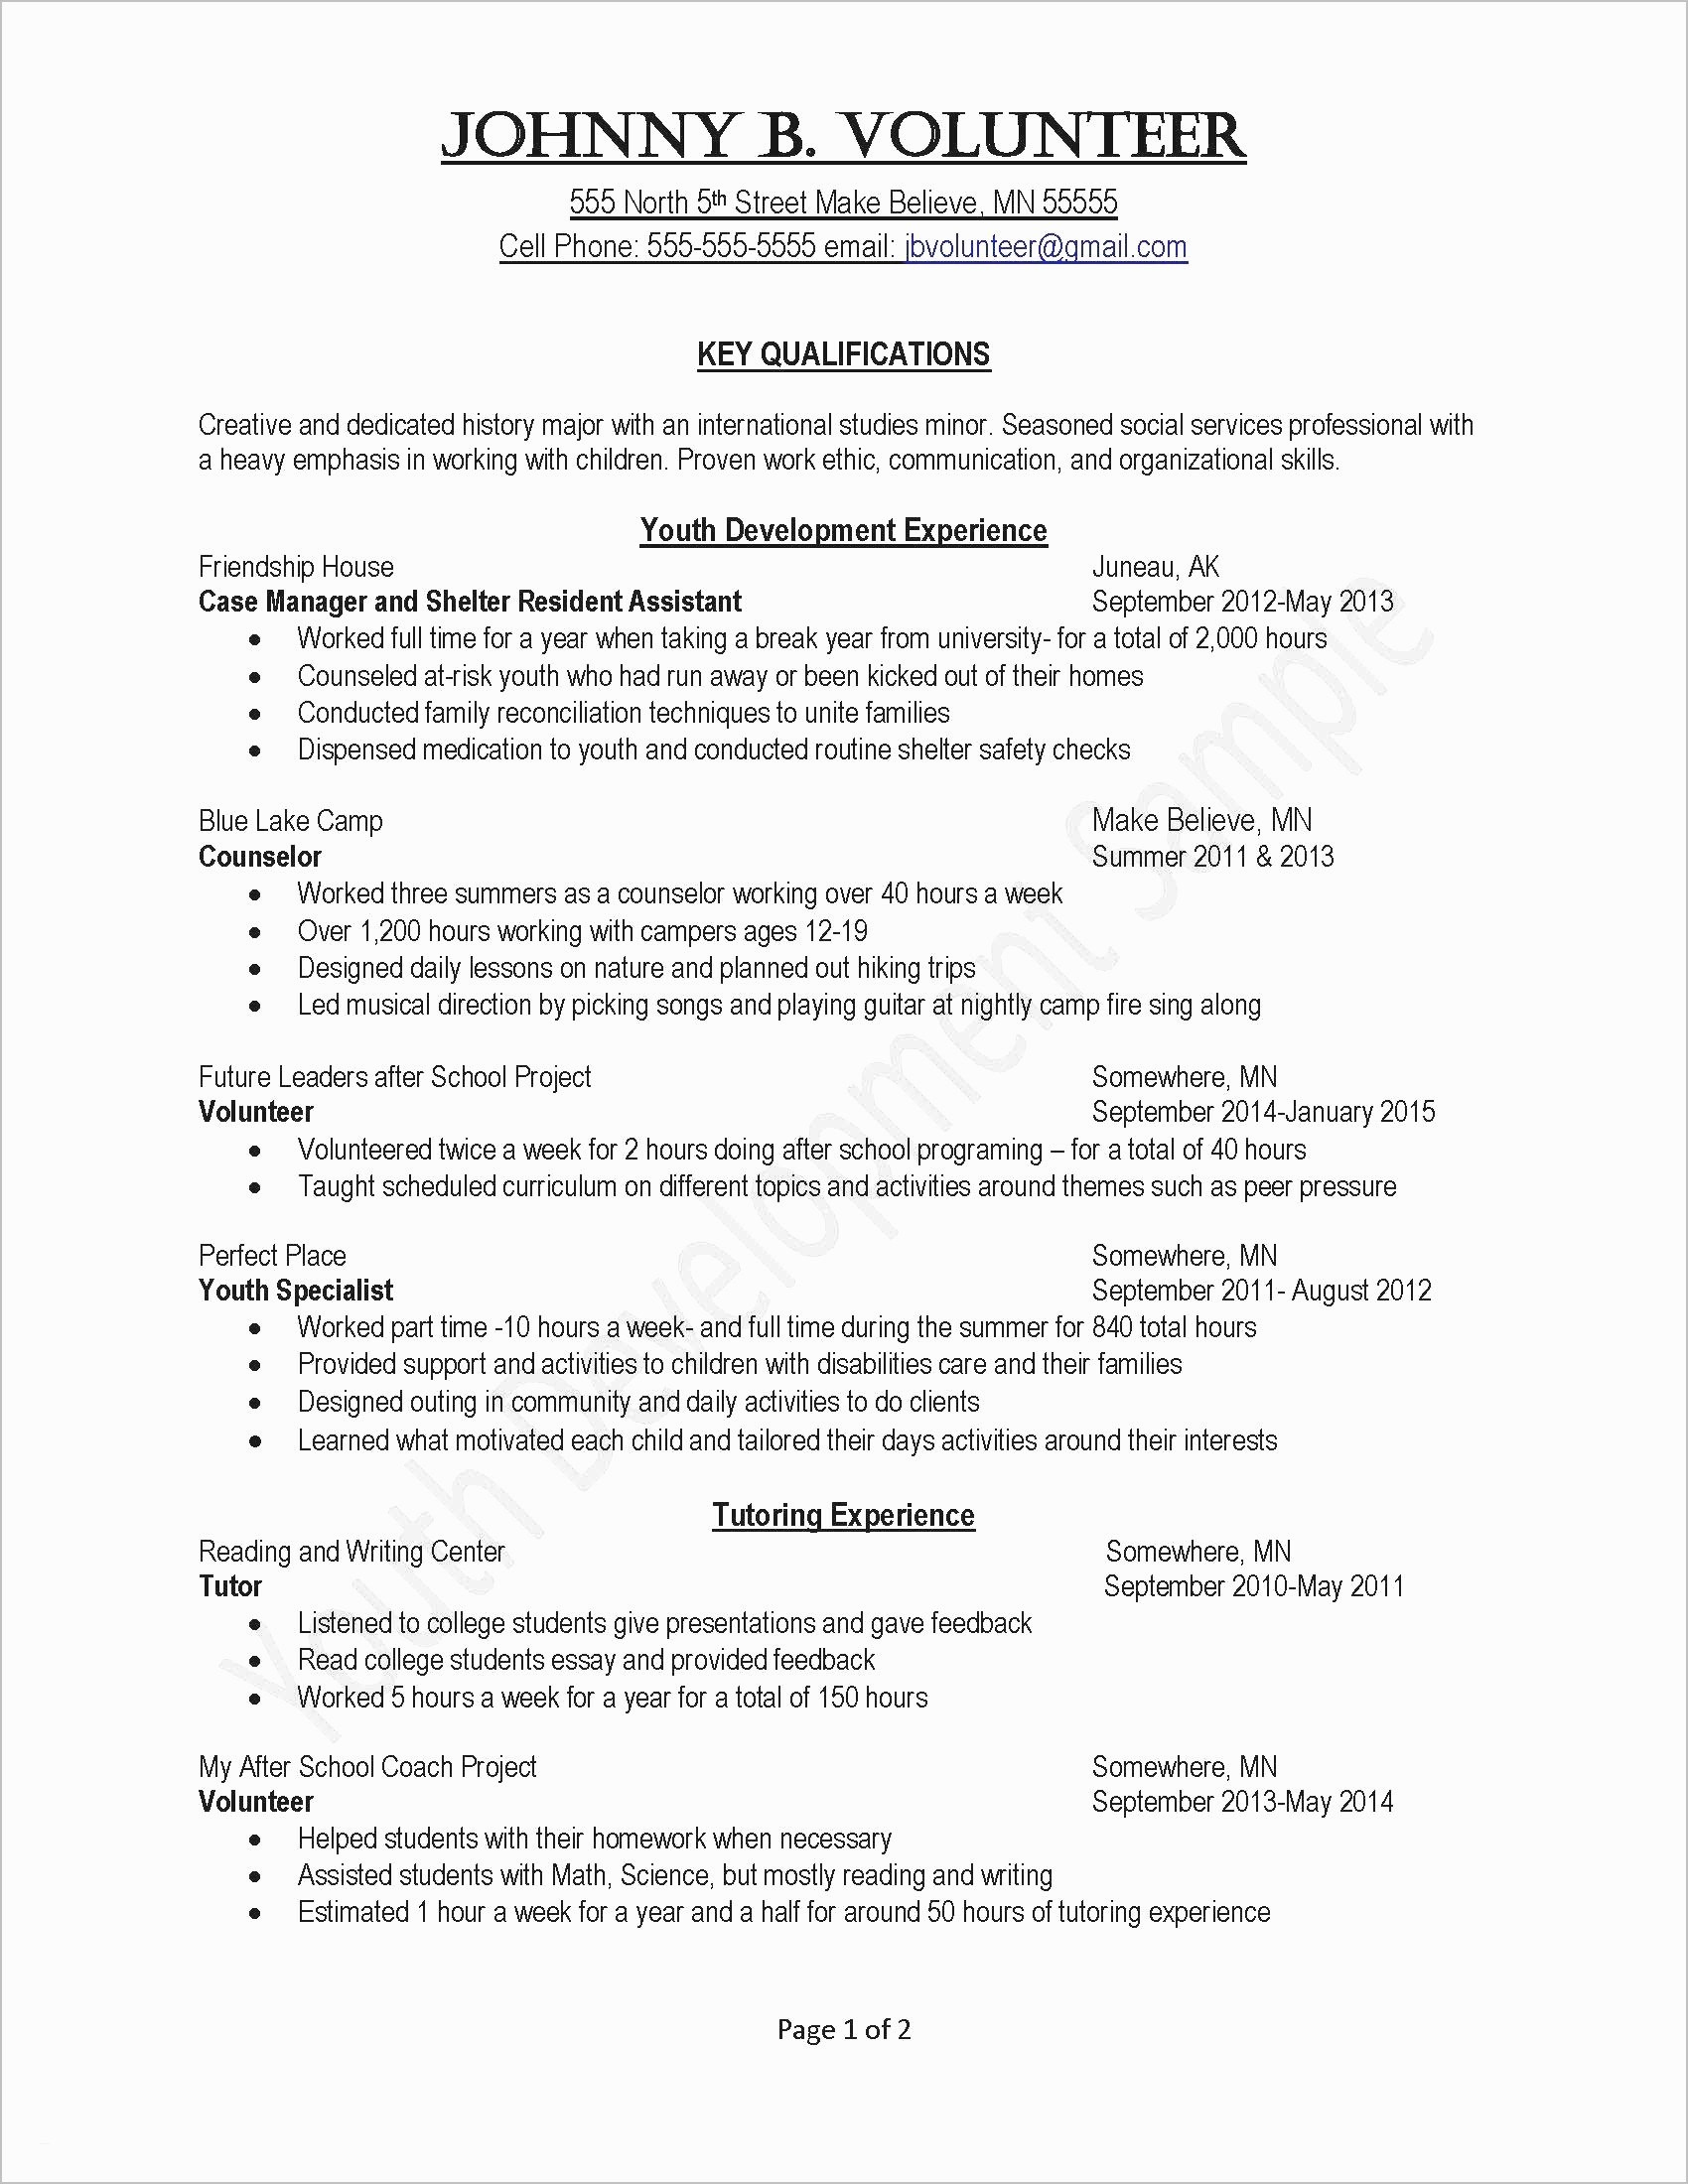 Manager Cover Letter Template - 20 District Manager Cover Letter